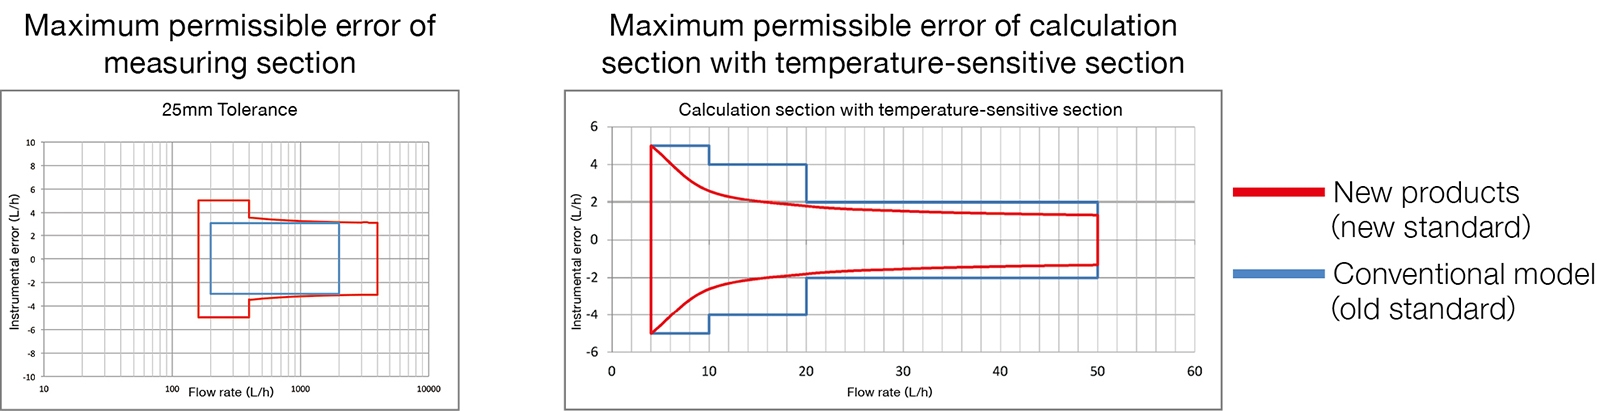 Maximum permissible error of measuring section / Maximum permissible error of calculation section with temperature-sensitive section